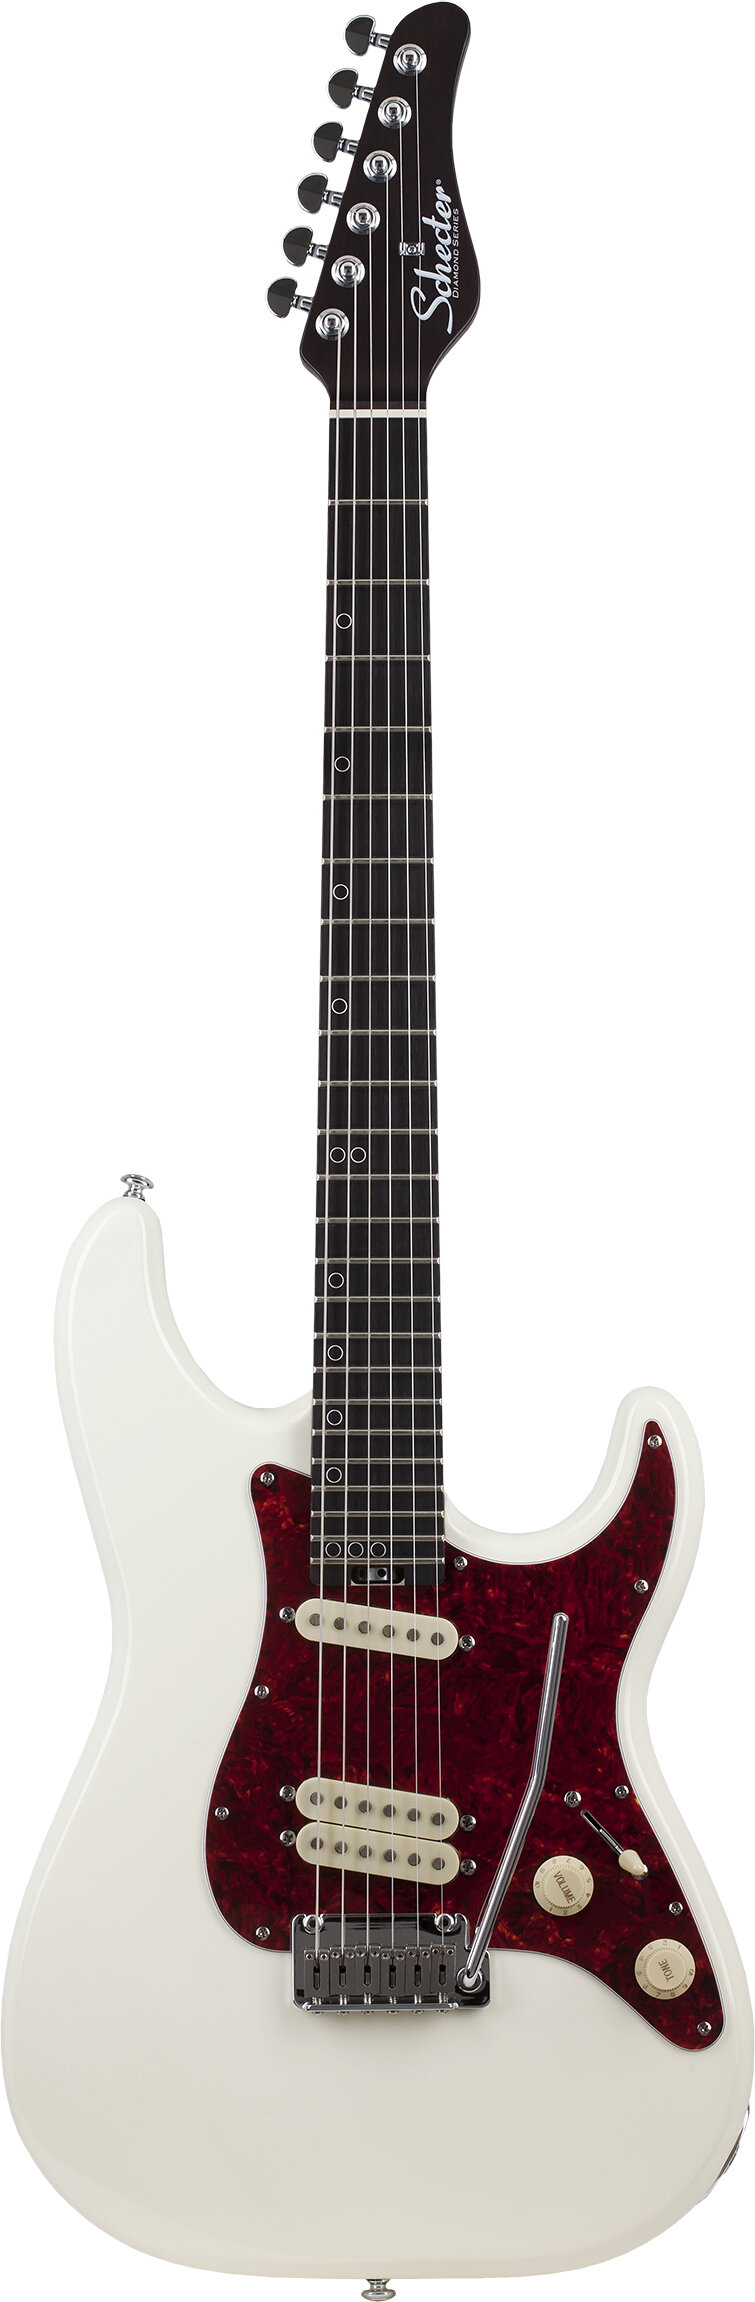 Schecter MV-6 Electric Guitar Olympic White -  4204